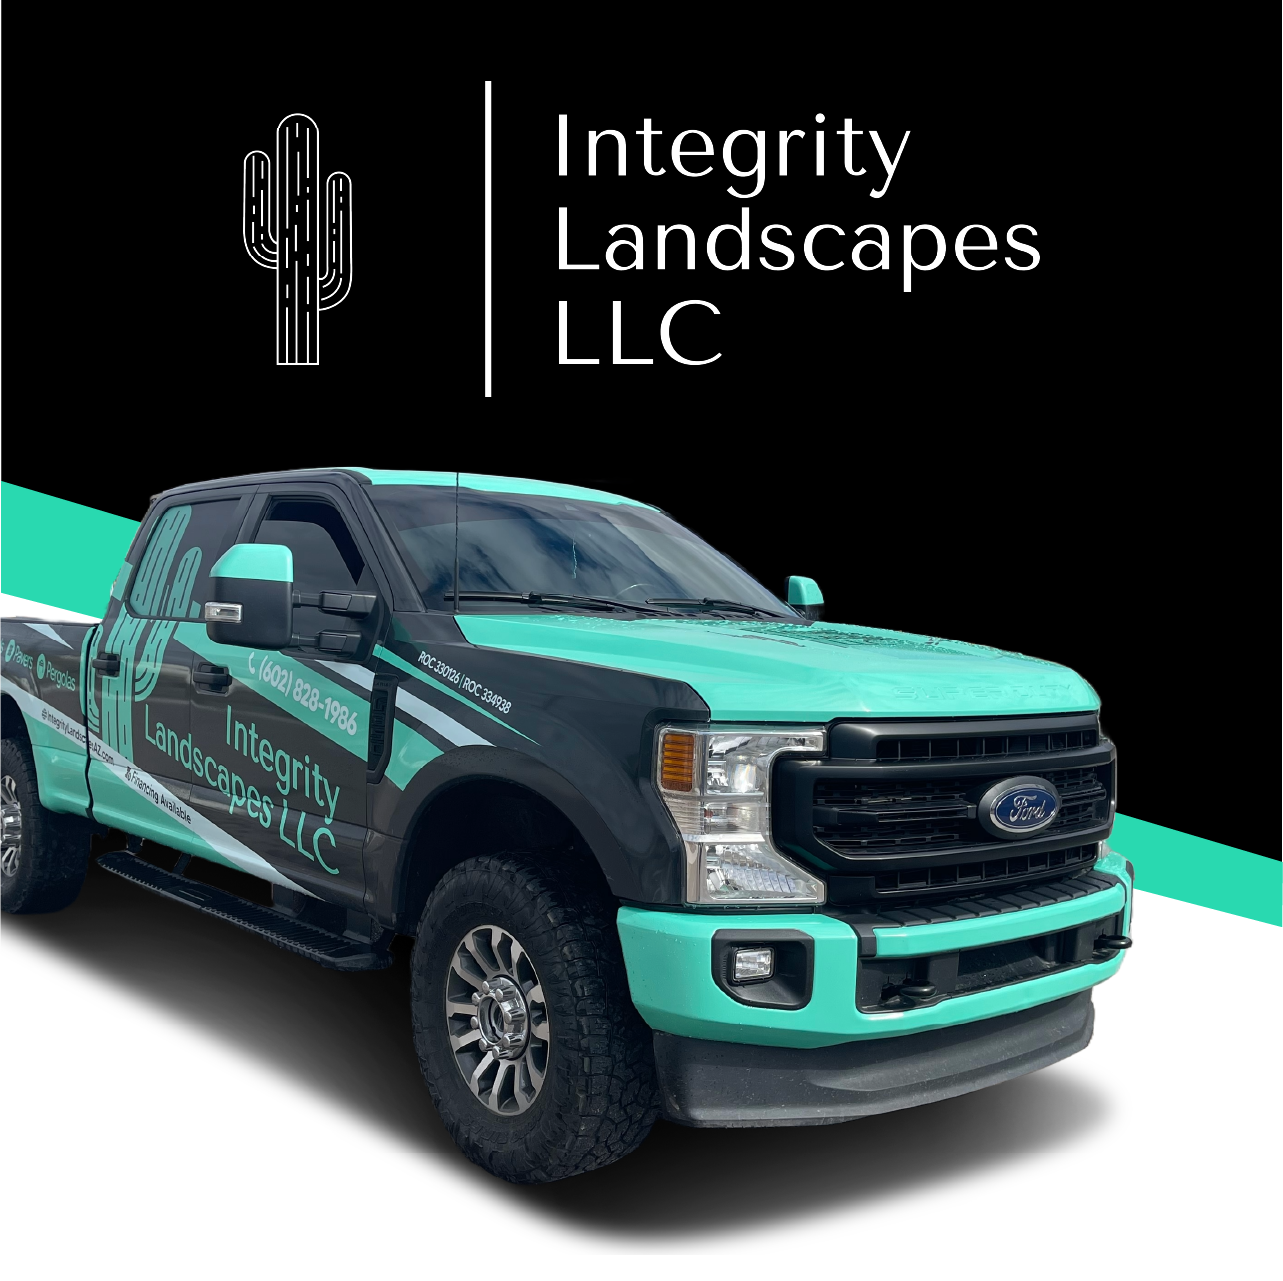 A truck is parked in front of a logo for integrity landscapes llc.